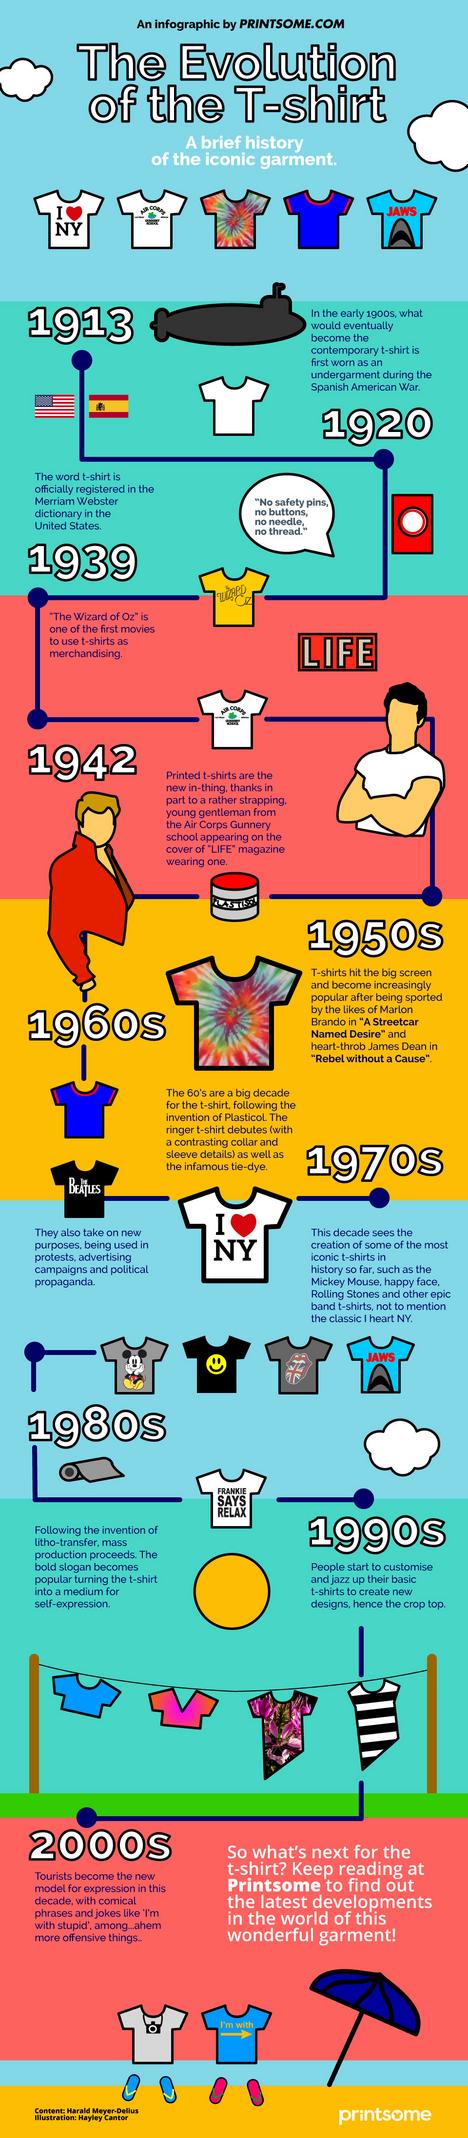 The Evolution of the T-Shirt